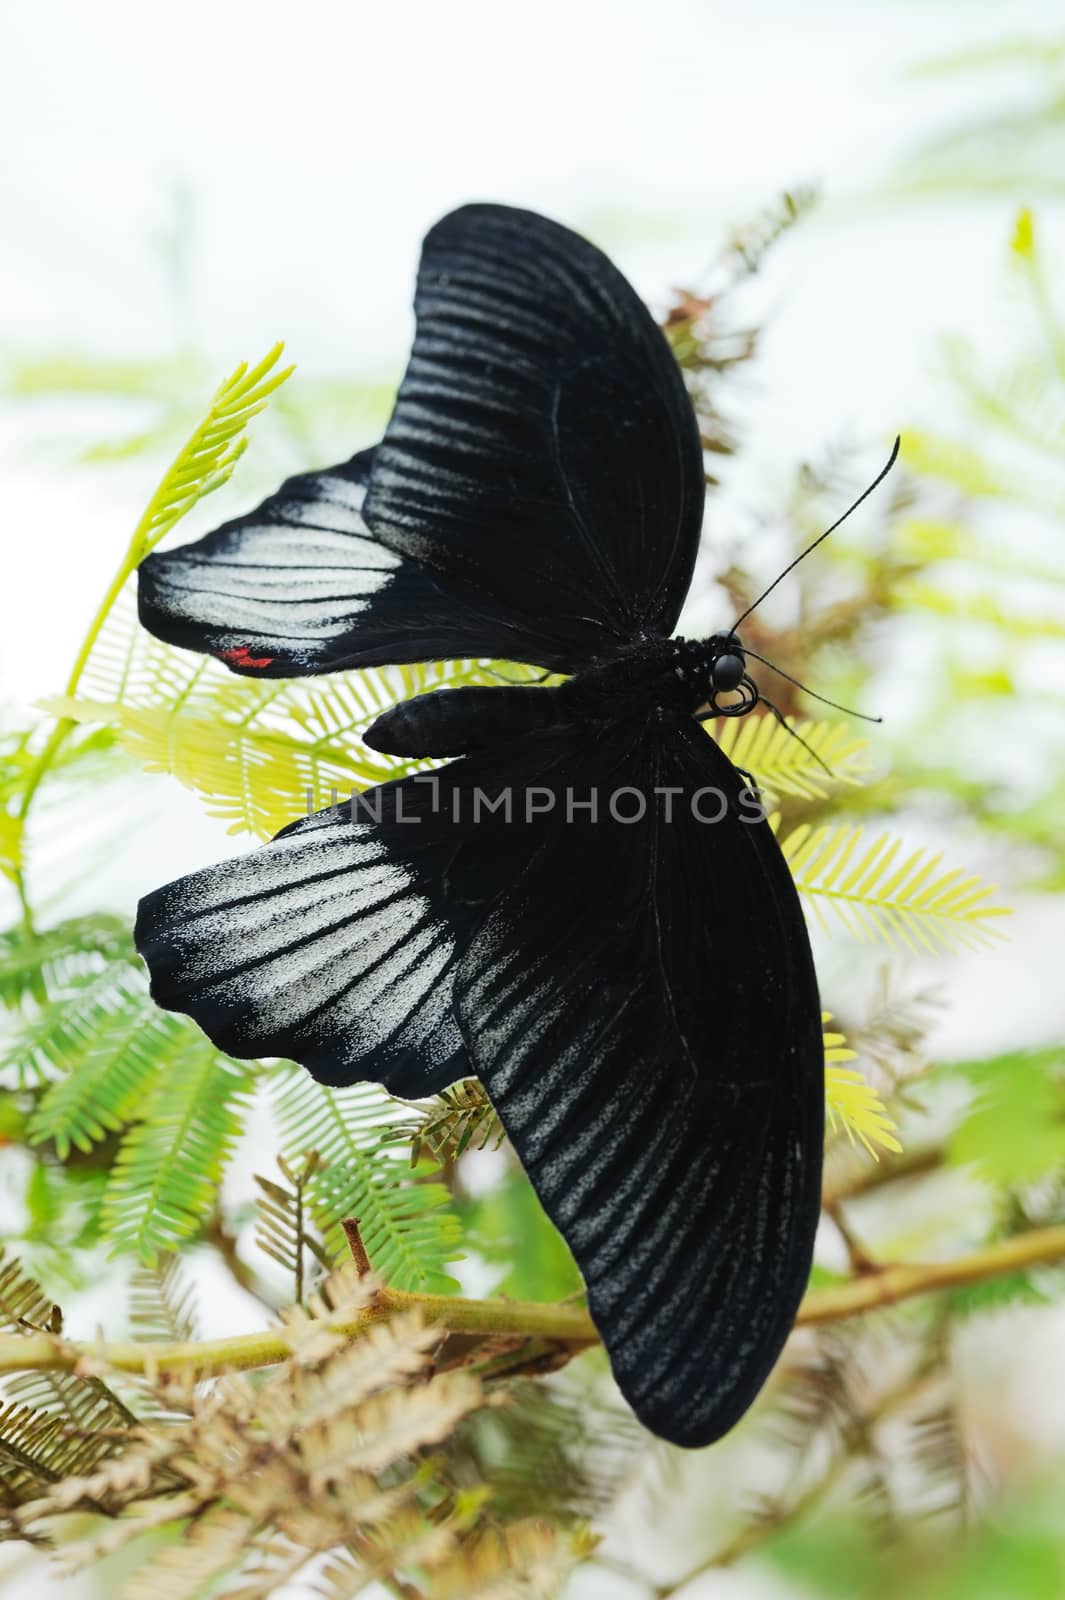 Scarlet Swallowtail butterfly by kmwphotography